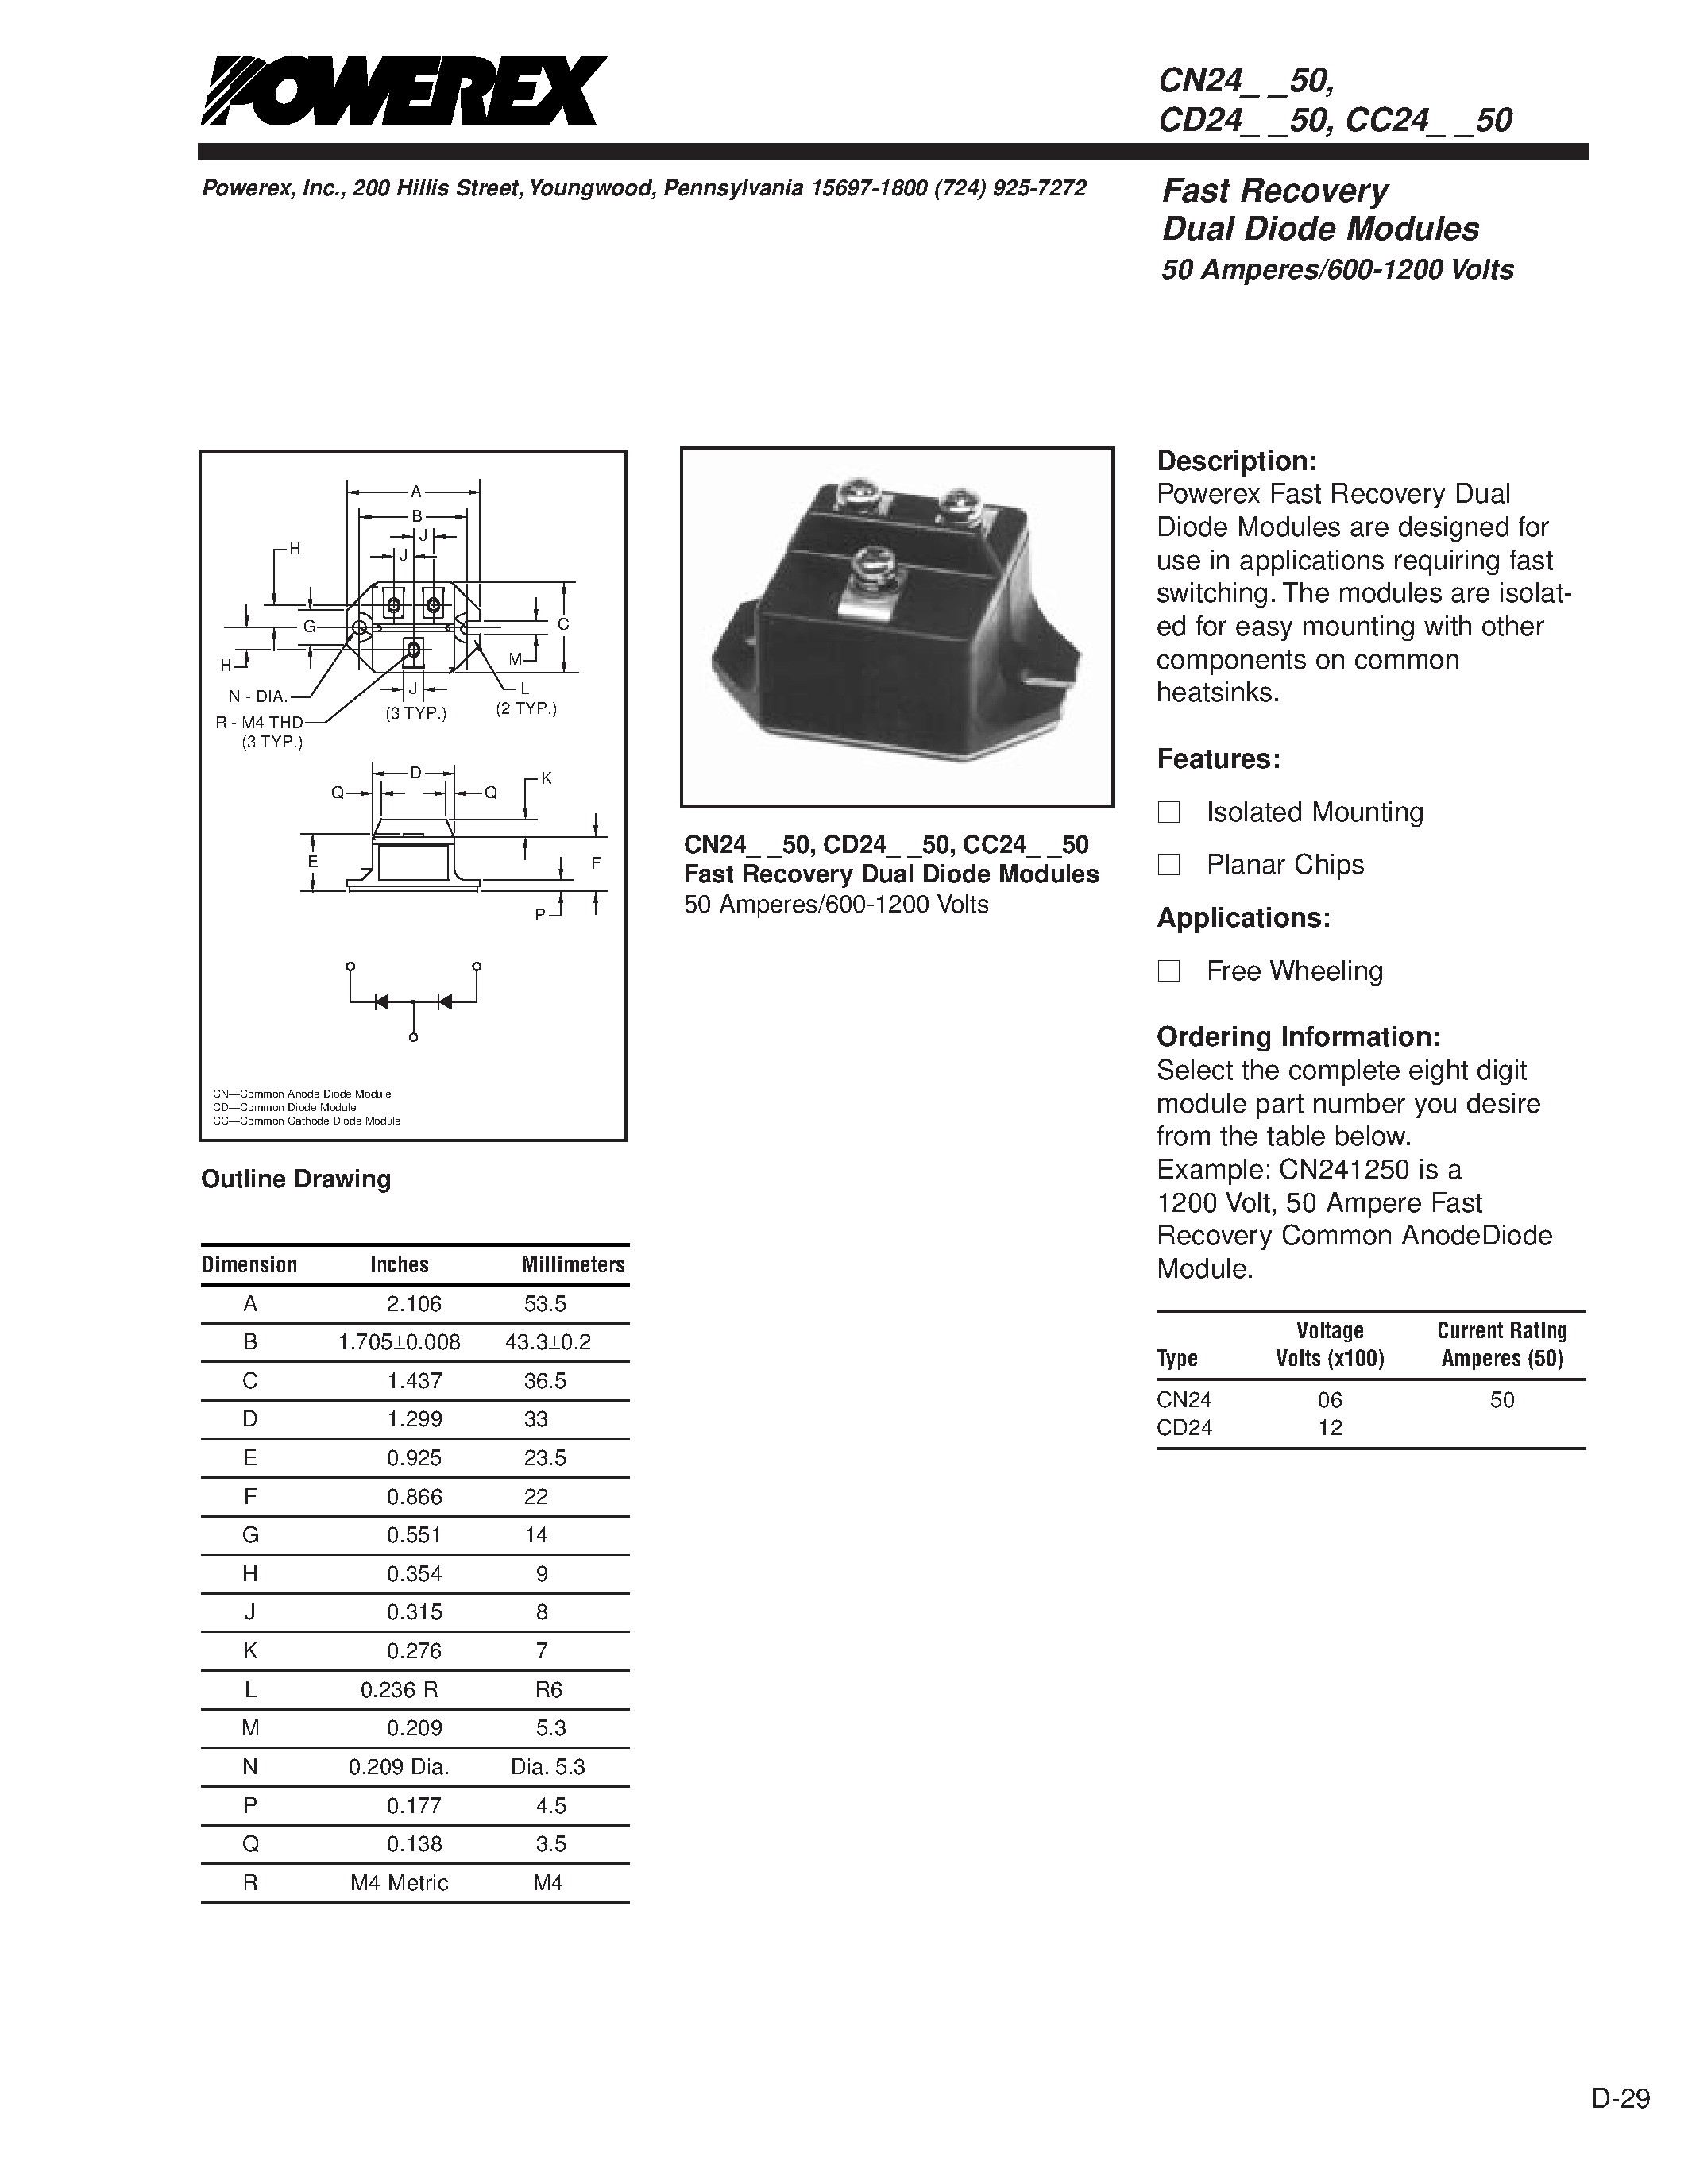 Datasheet CD240650 - Fast Recovery Dual Diode Modules 50 Amperes/600-1200 Volts page 1